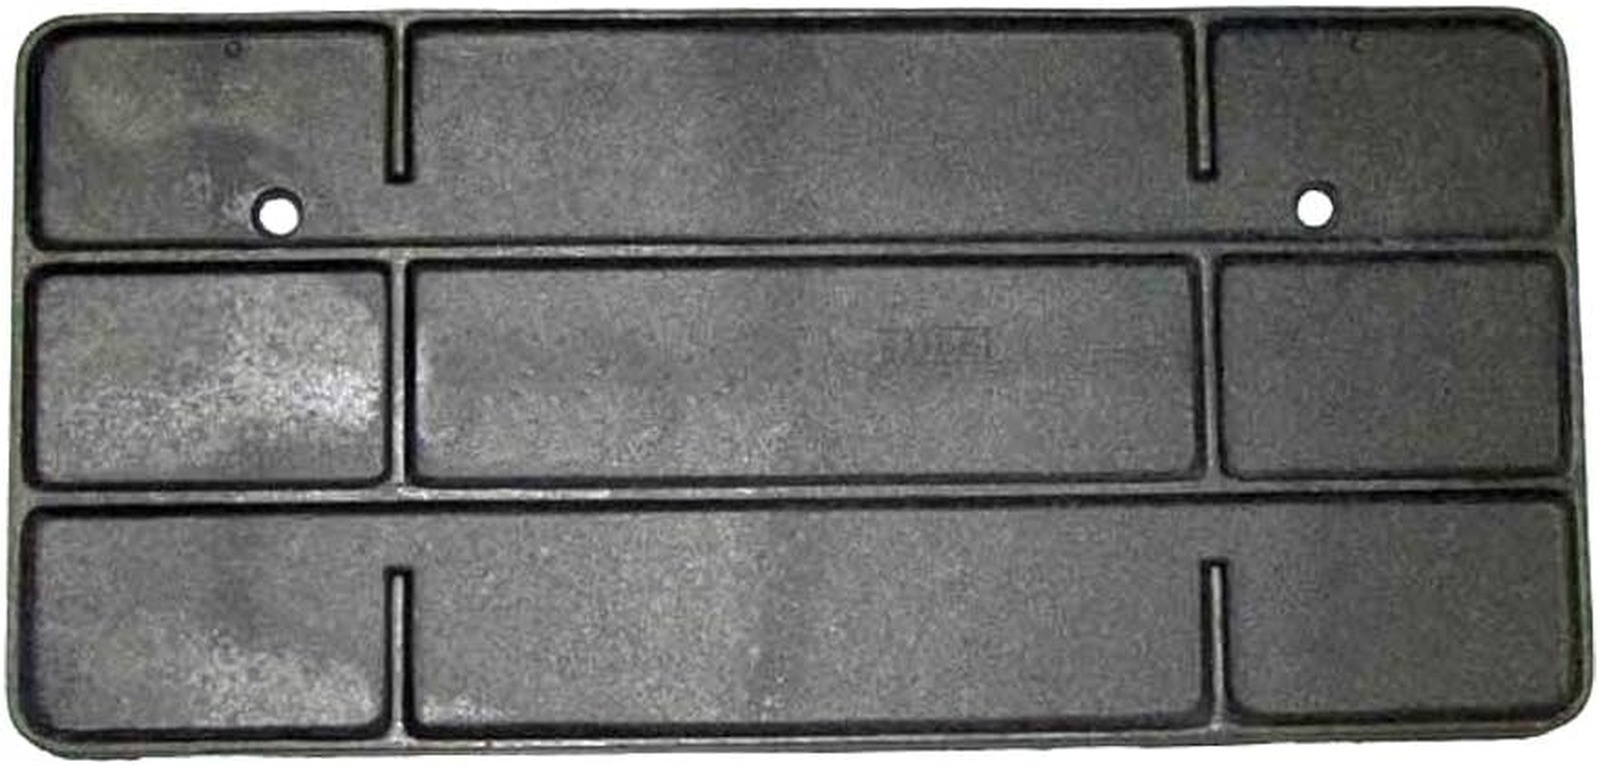 Vermont Castings 7001166A Back Grate